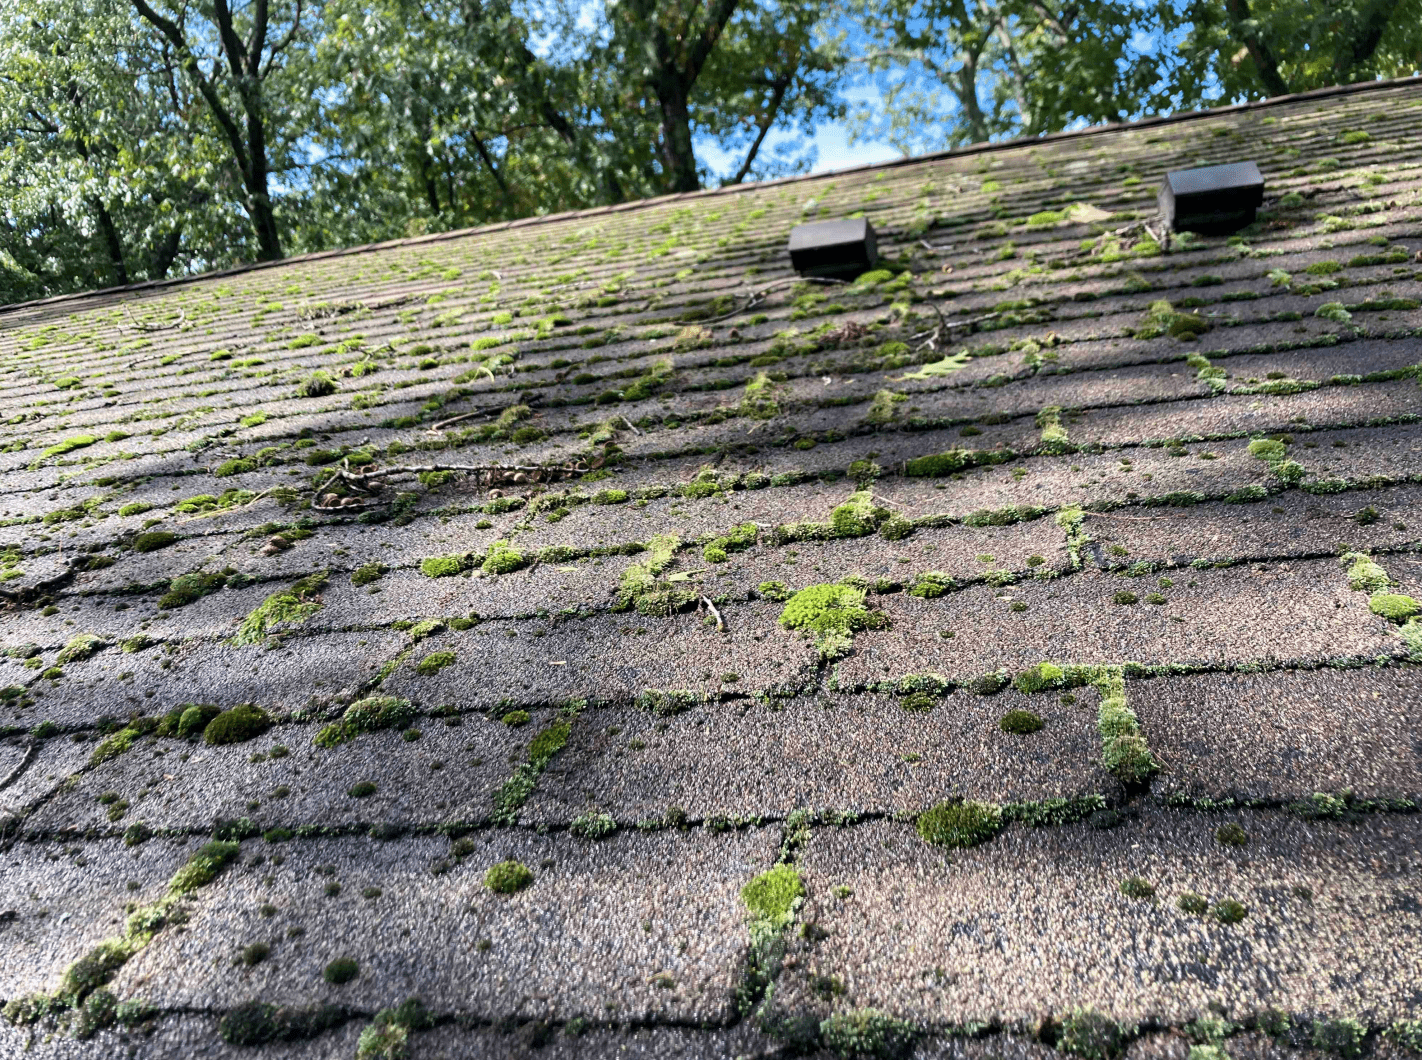 Old asphalt shingles with algae growth. A top cause of leaks.